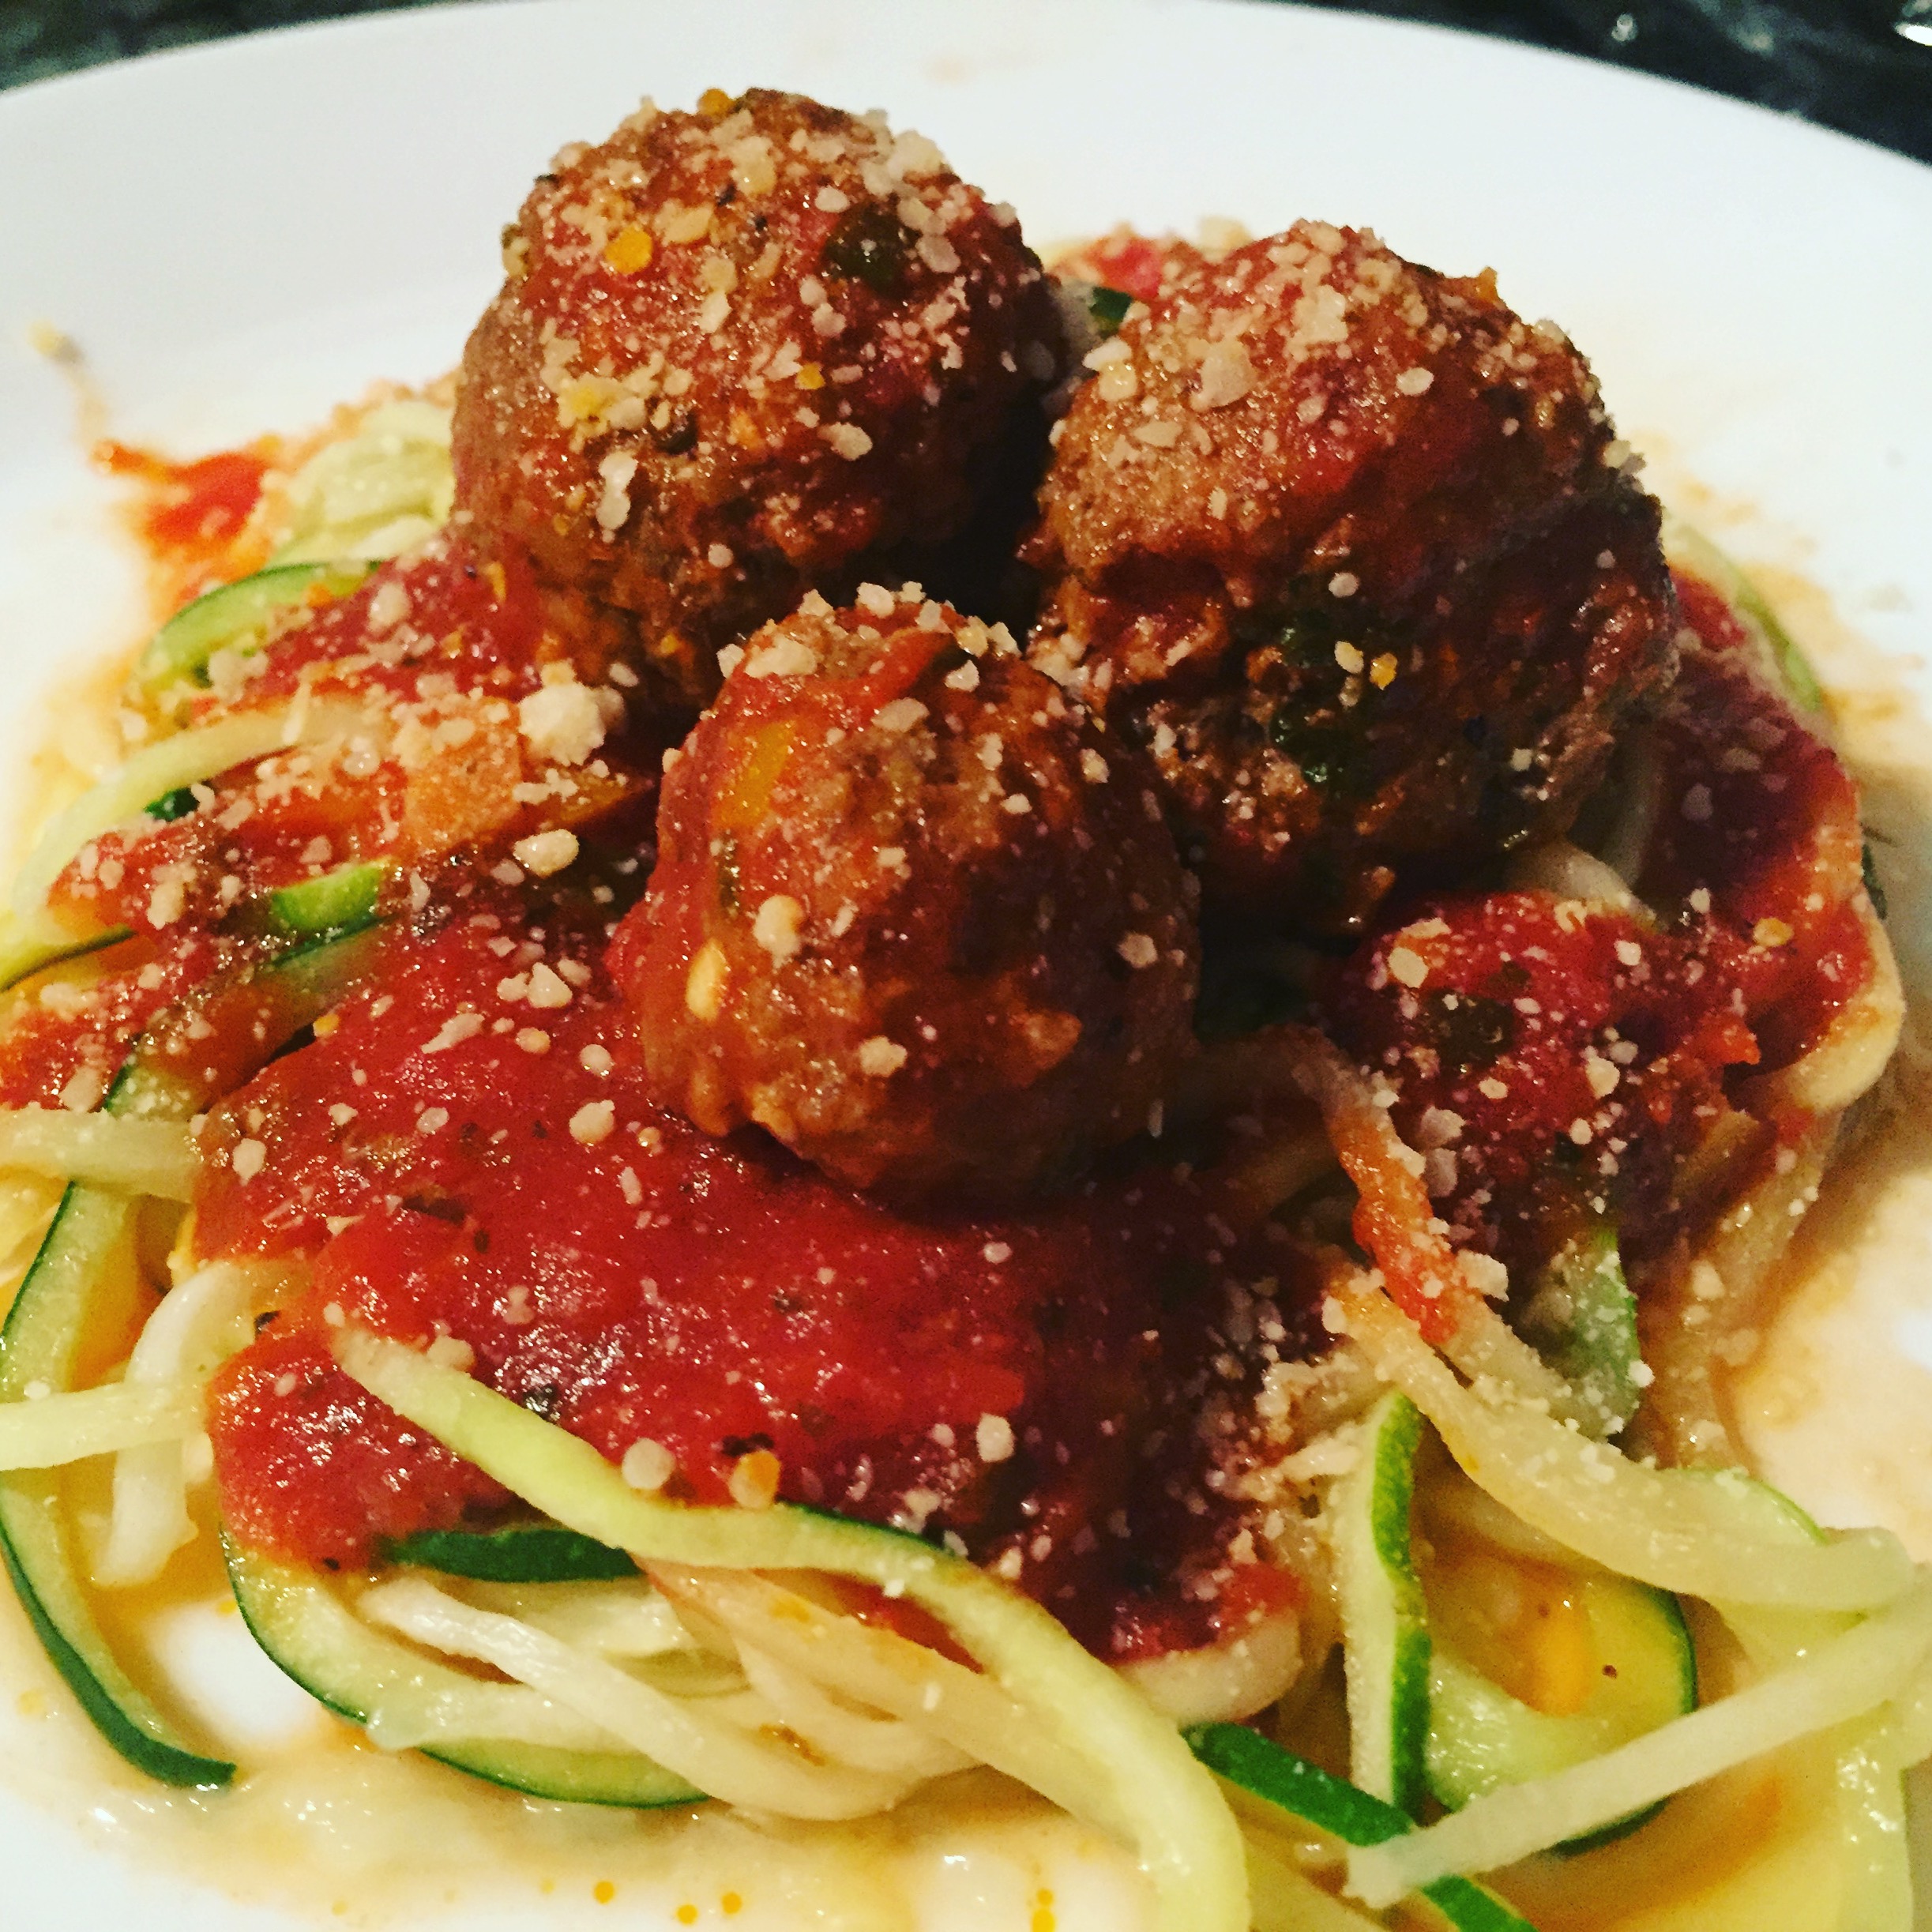 Zoodles (Zucchini Noodles) and Meatballs